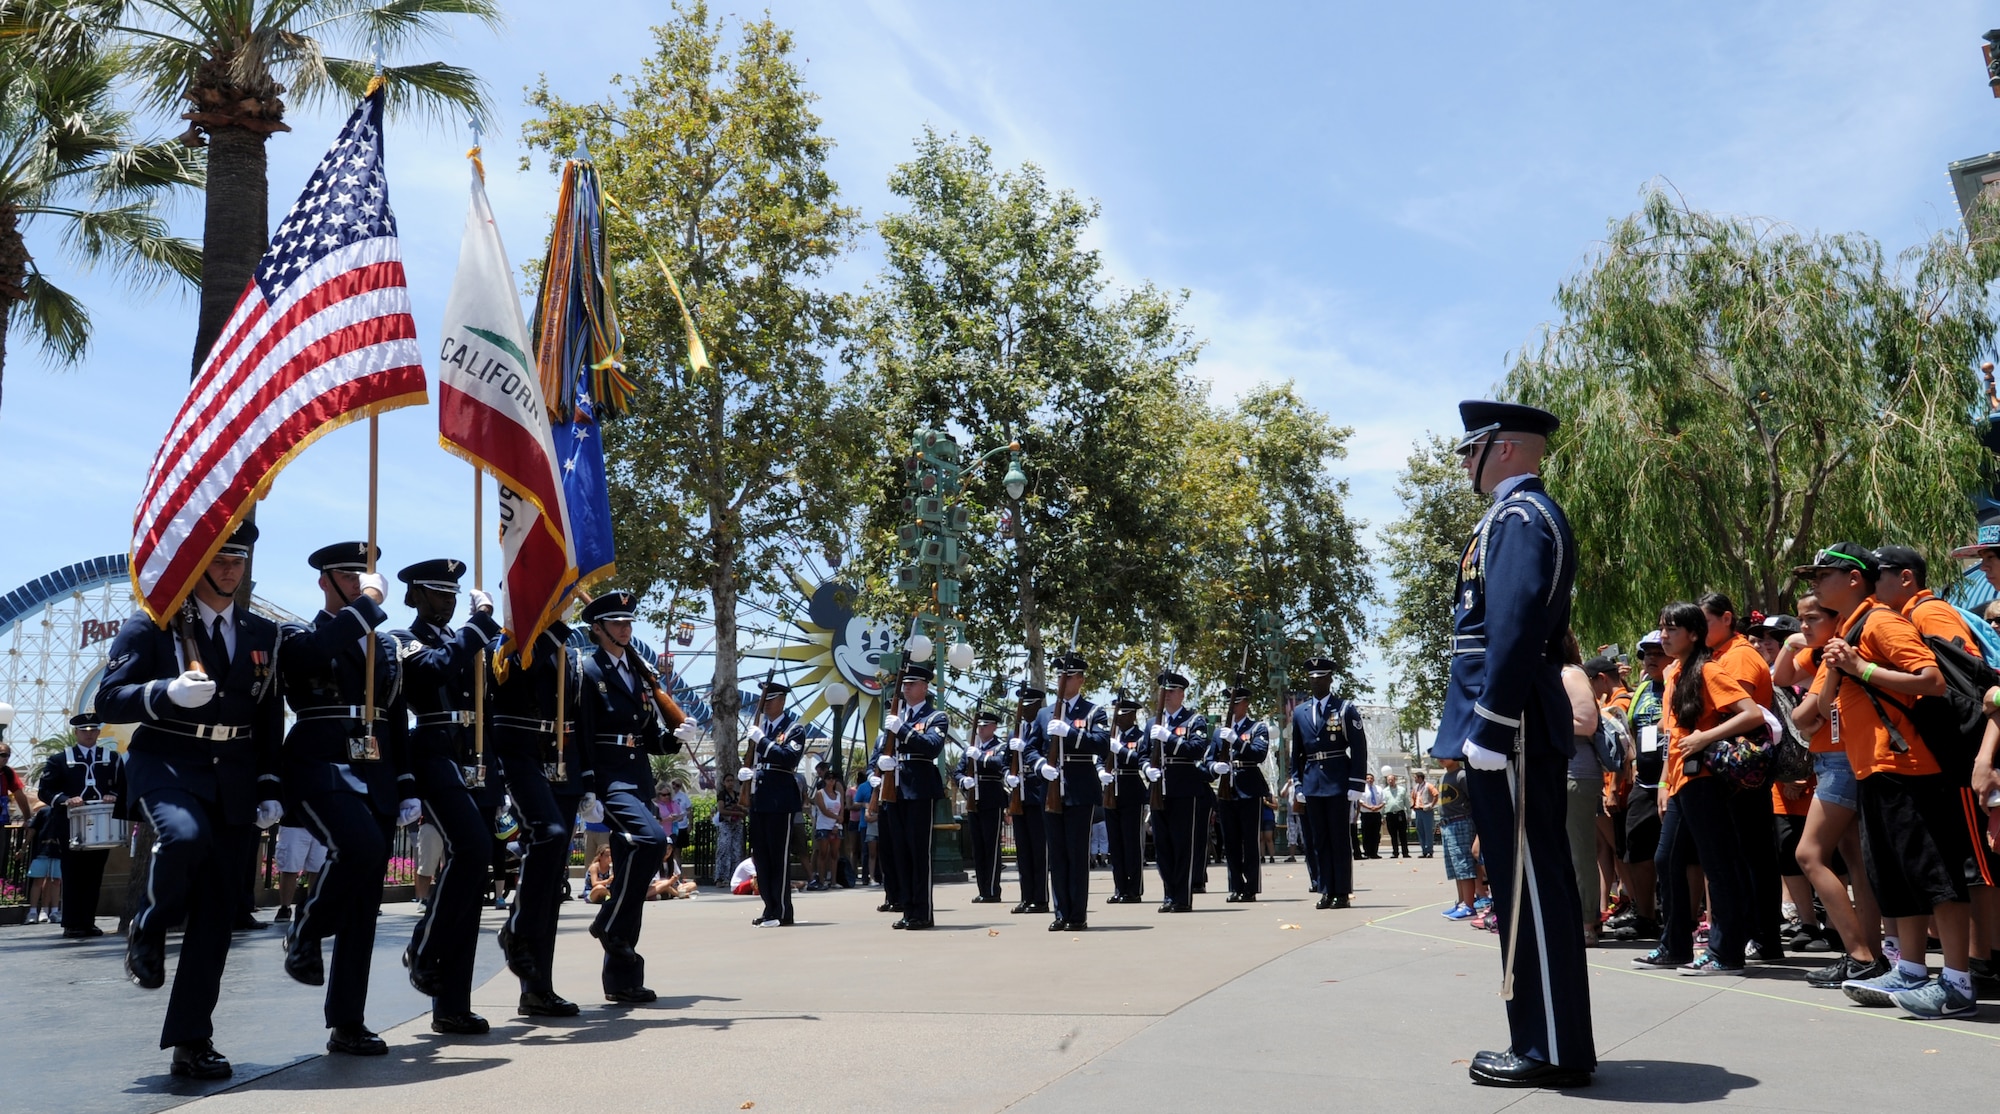 The United States Air Force Honor Guard color guard posts the colors during a drill performance at Disney’s California Adventure, July 2, 2015. (U.S. Air Force photo Staff Sgt. Nichelle Anderson)